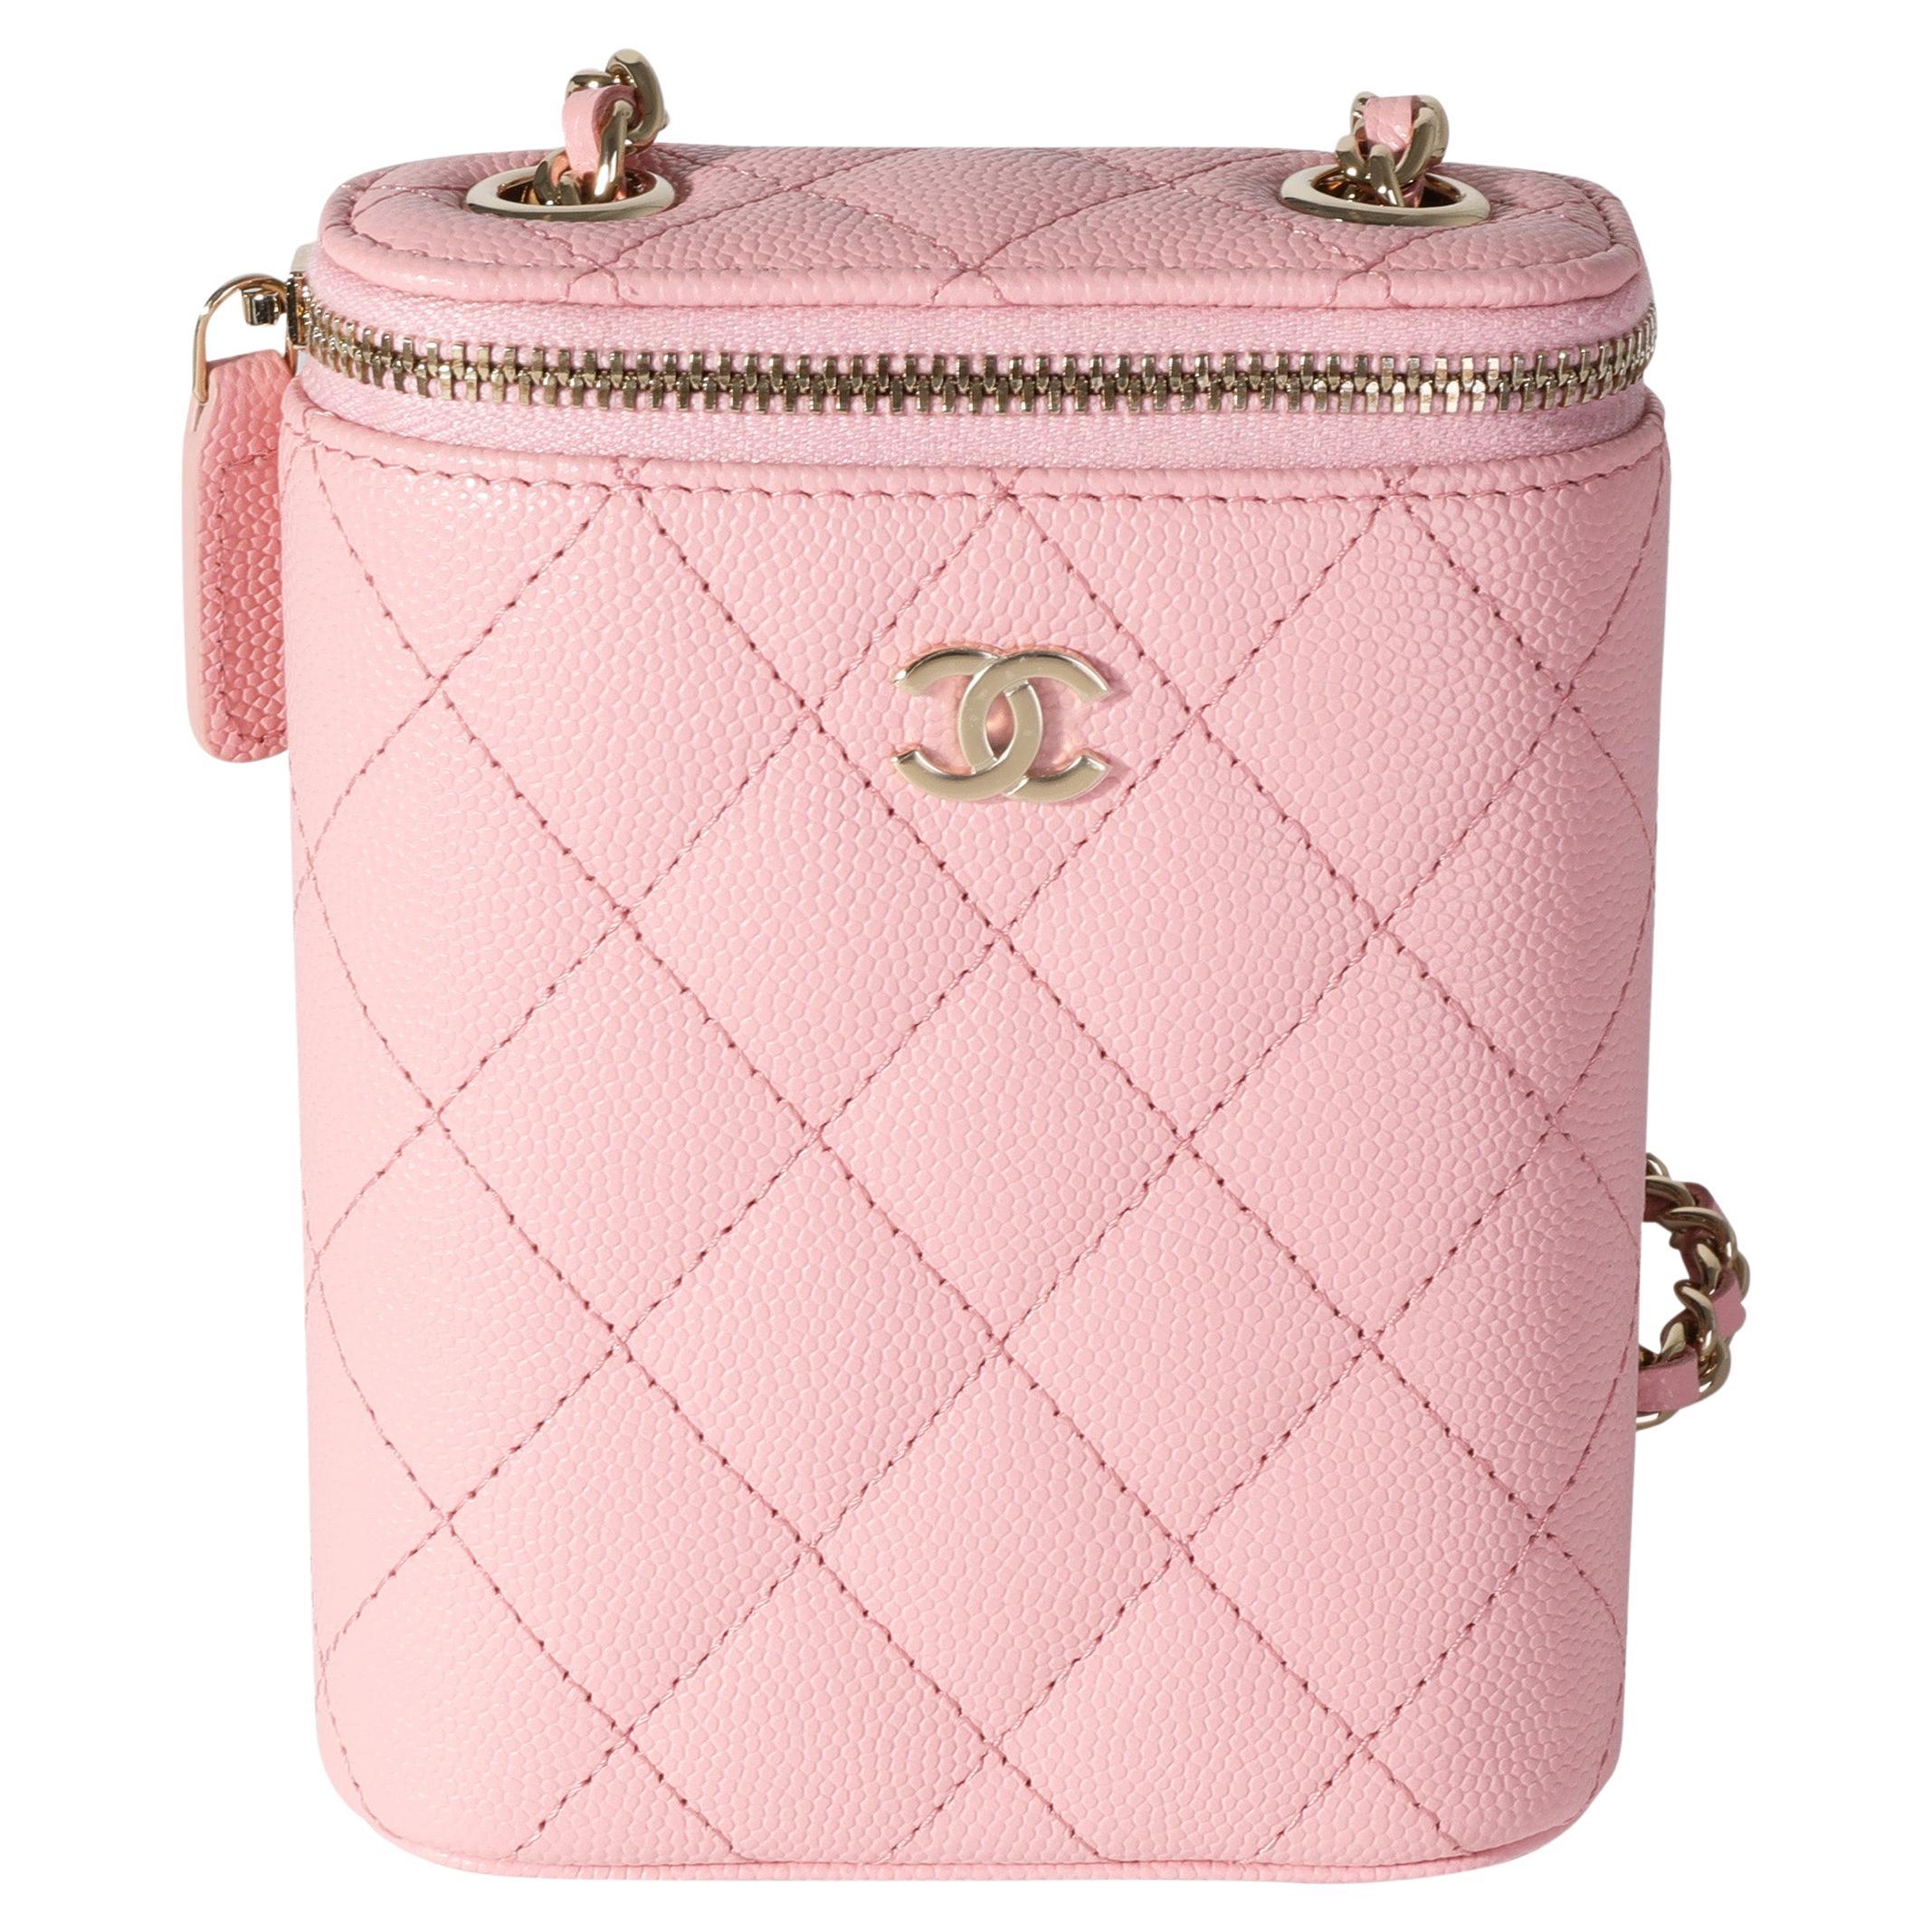 Chanel Sakura Pink Caviar Vertical Vanity Bag With Chain For Sale